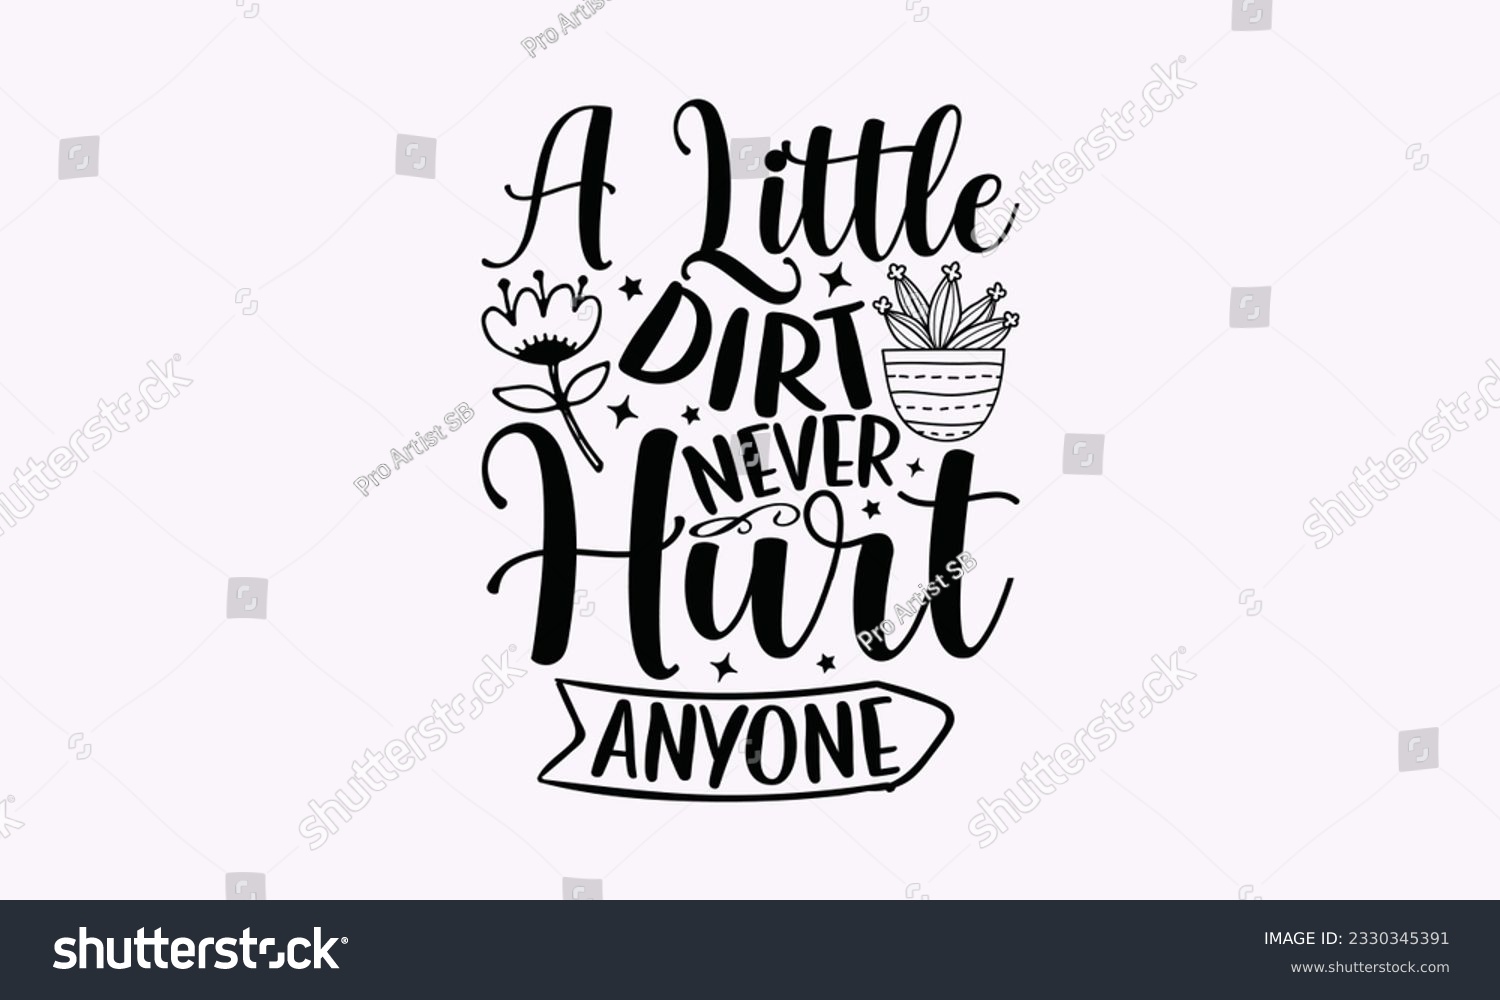 SVG of A little dirt never hurt anyone - Gardening SVG Design, Flower Quotes, Calligraphy graphic design, Typography poster with old style camera and quote. svg